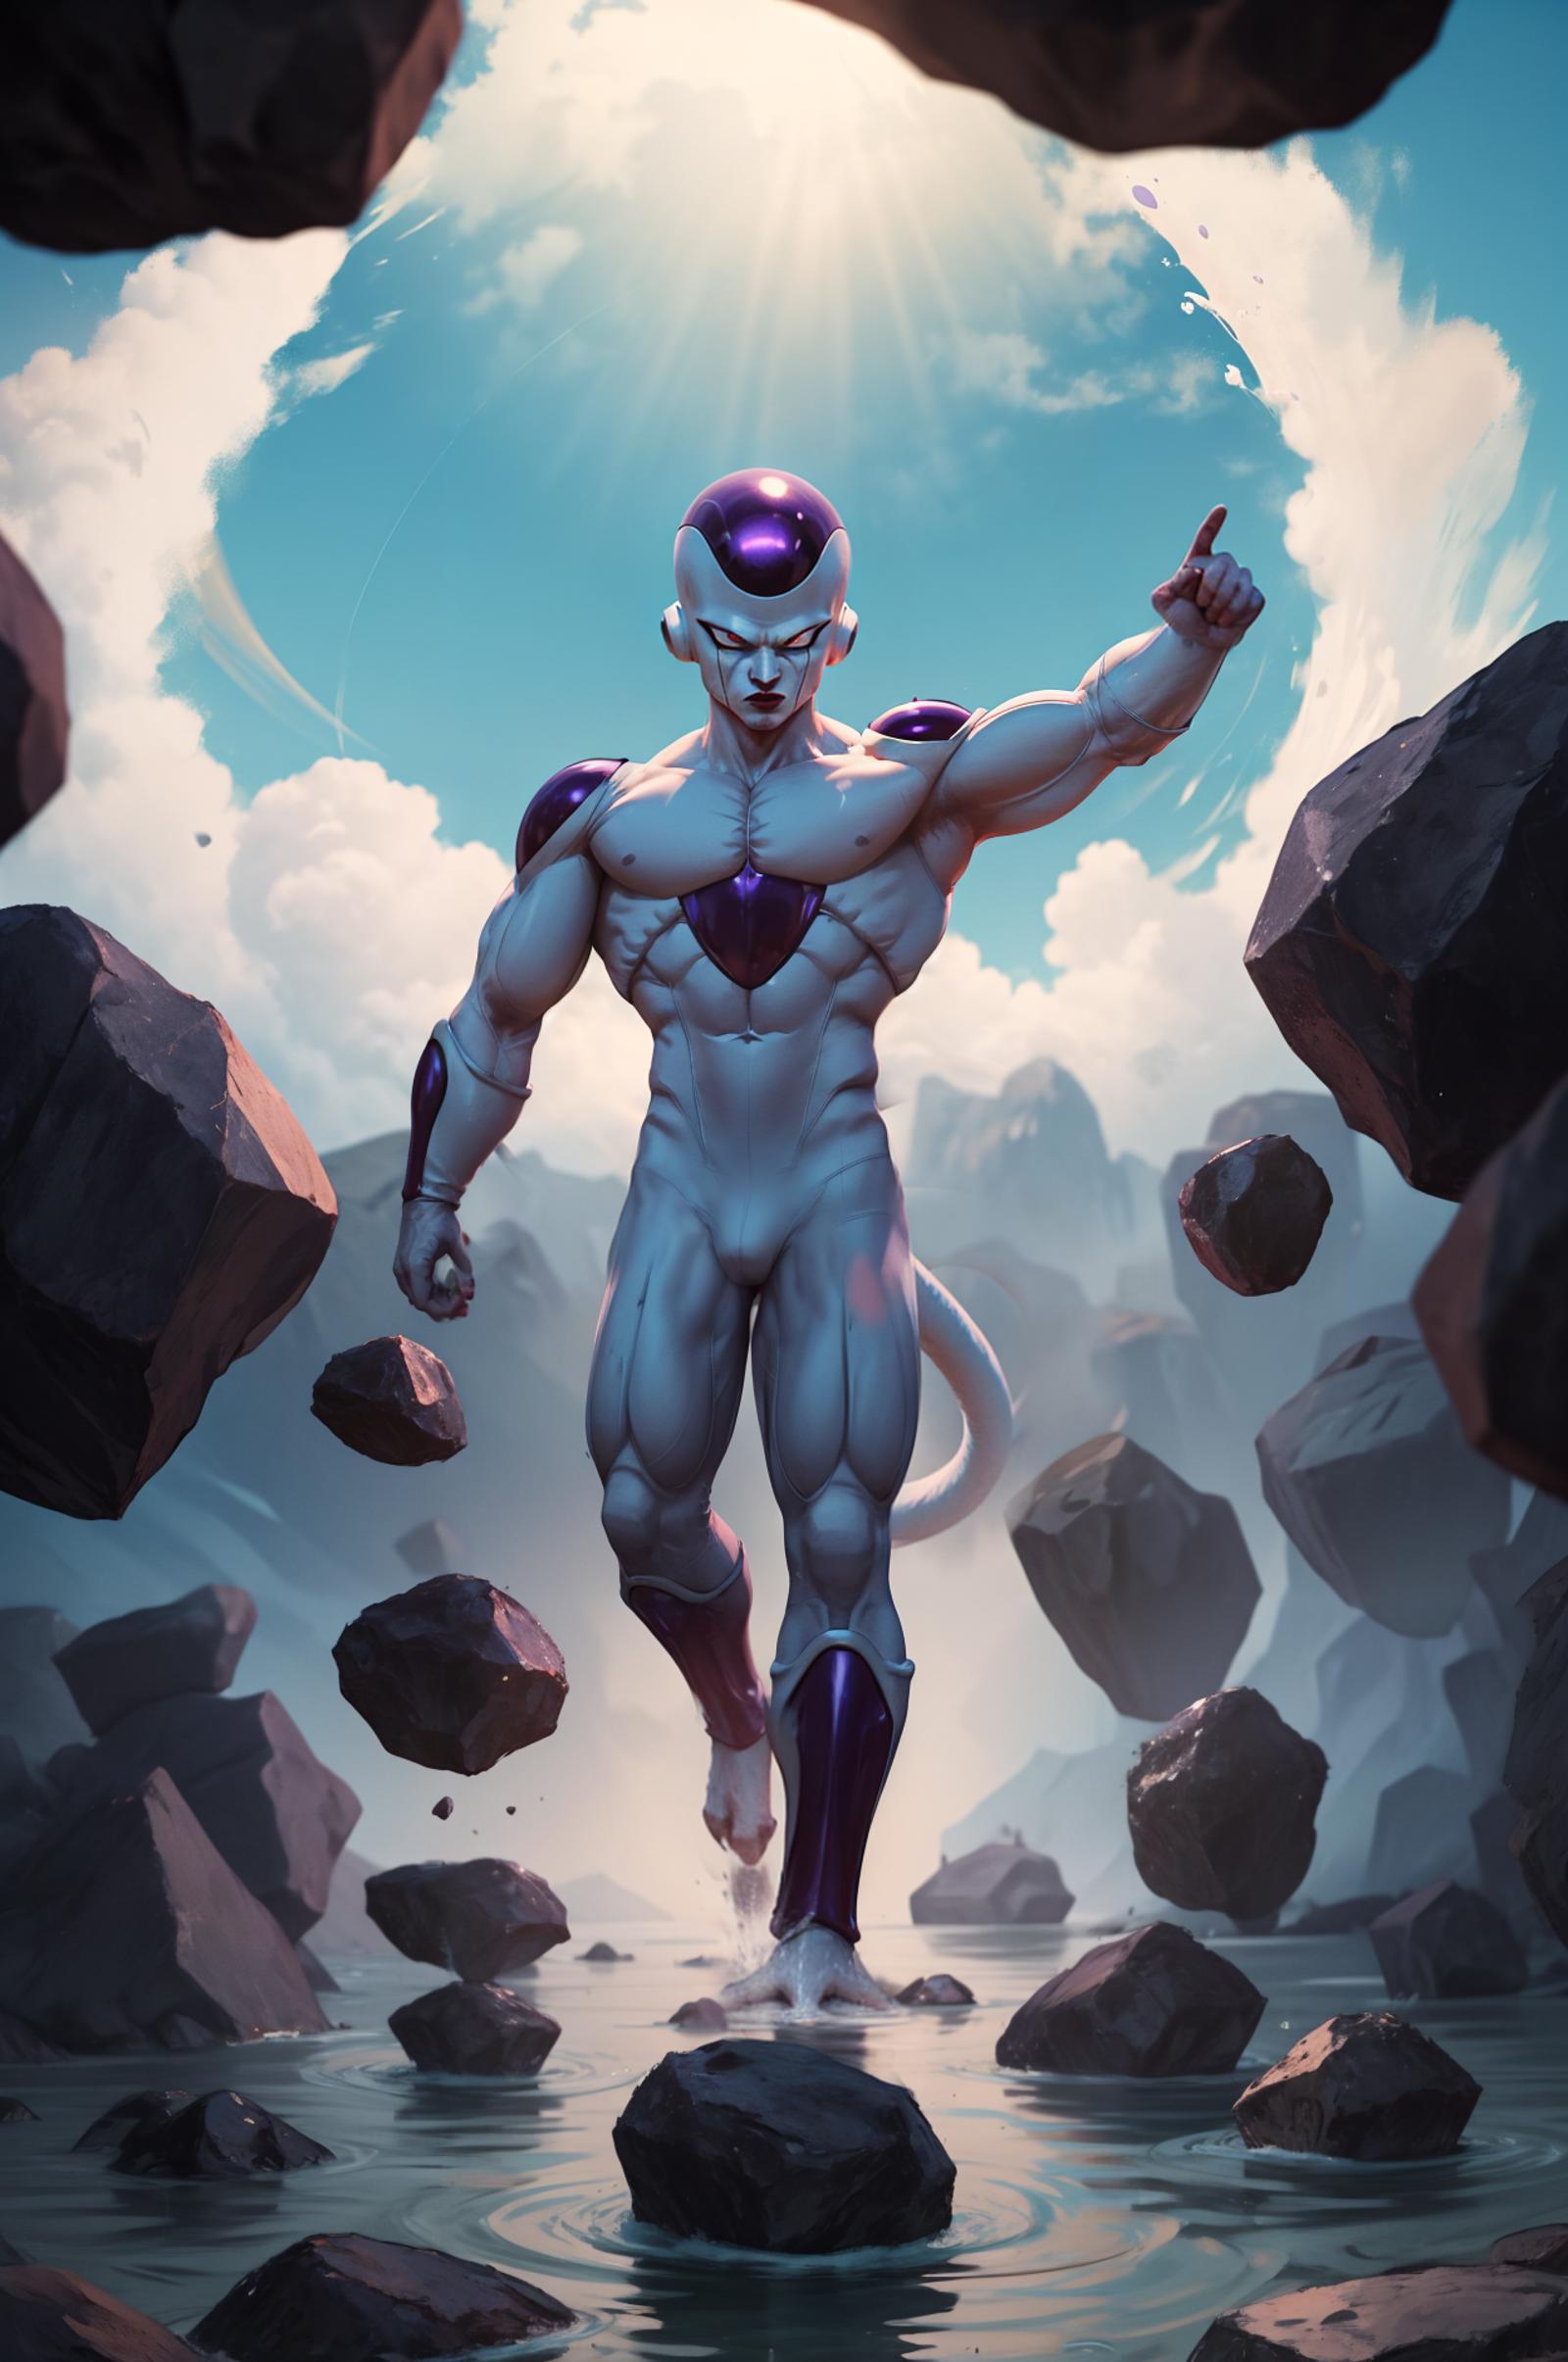 A cartoon character, possibly from Dragon Ball, is standing on a rocky surface, pointing upwards with his arm raised. The scene is set against a backdrop of rocks and possibly a blue sky. The character appears to be a powerful and heroic figure, possibly showcasing his strength and determination.